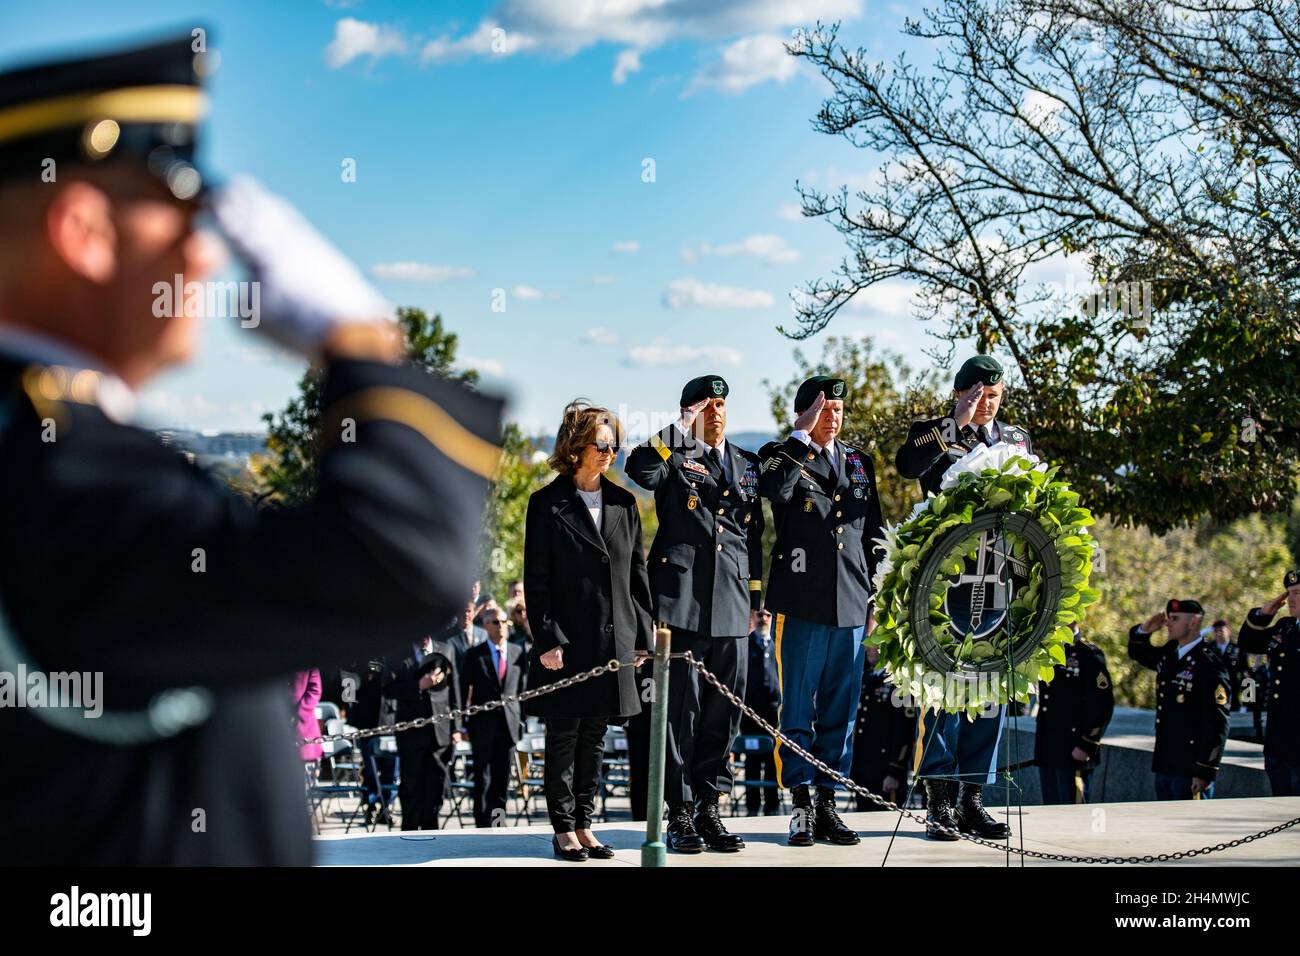 Arlington, United States of America. 03 November, 2021. Kathleen Kennedy Townsend, Army Maj. Gen. Richard Angle, Army Command Sgt. Maj. Ted Munter, and Army Chief Warrant Officer Scott Gronowski, with the 1st Special Forces Airborne Command, known as the Green Berets, hold a wreath-laying ceremony at the gravesite of President John F. Kennedy at Arlington National Cemetery November 3, 2021 in Arlington, Virginia. The ceremony commemorates Kennedy's contributions to the U.S. Army Special Forces. Credit: Elizabeth Fraser/U.S. Army/Alamy Live News Stock Photo